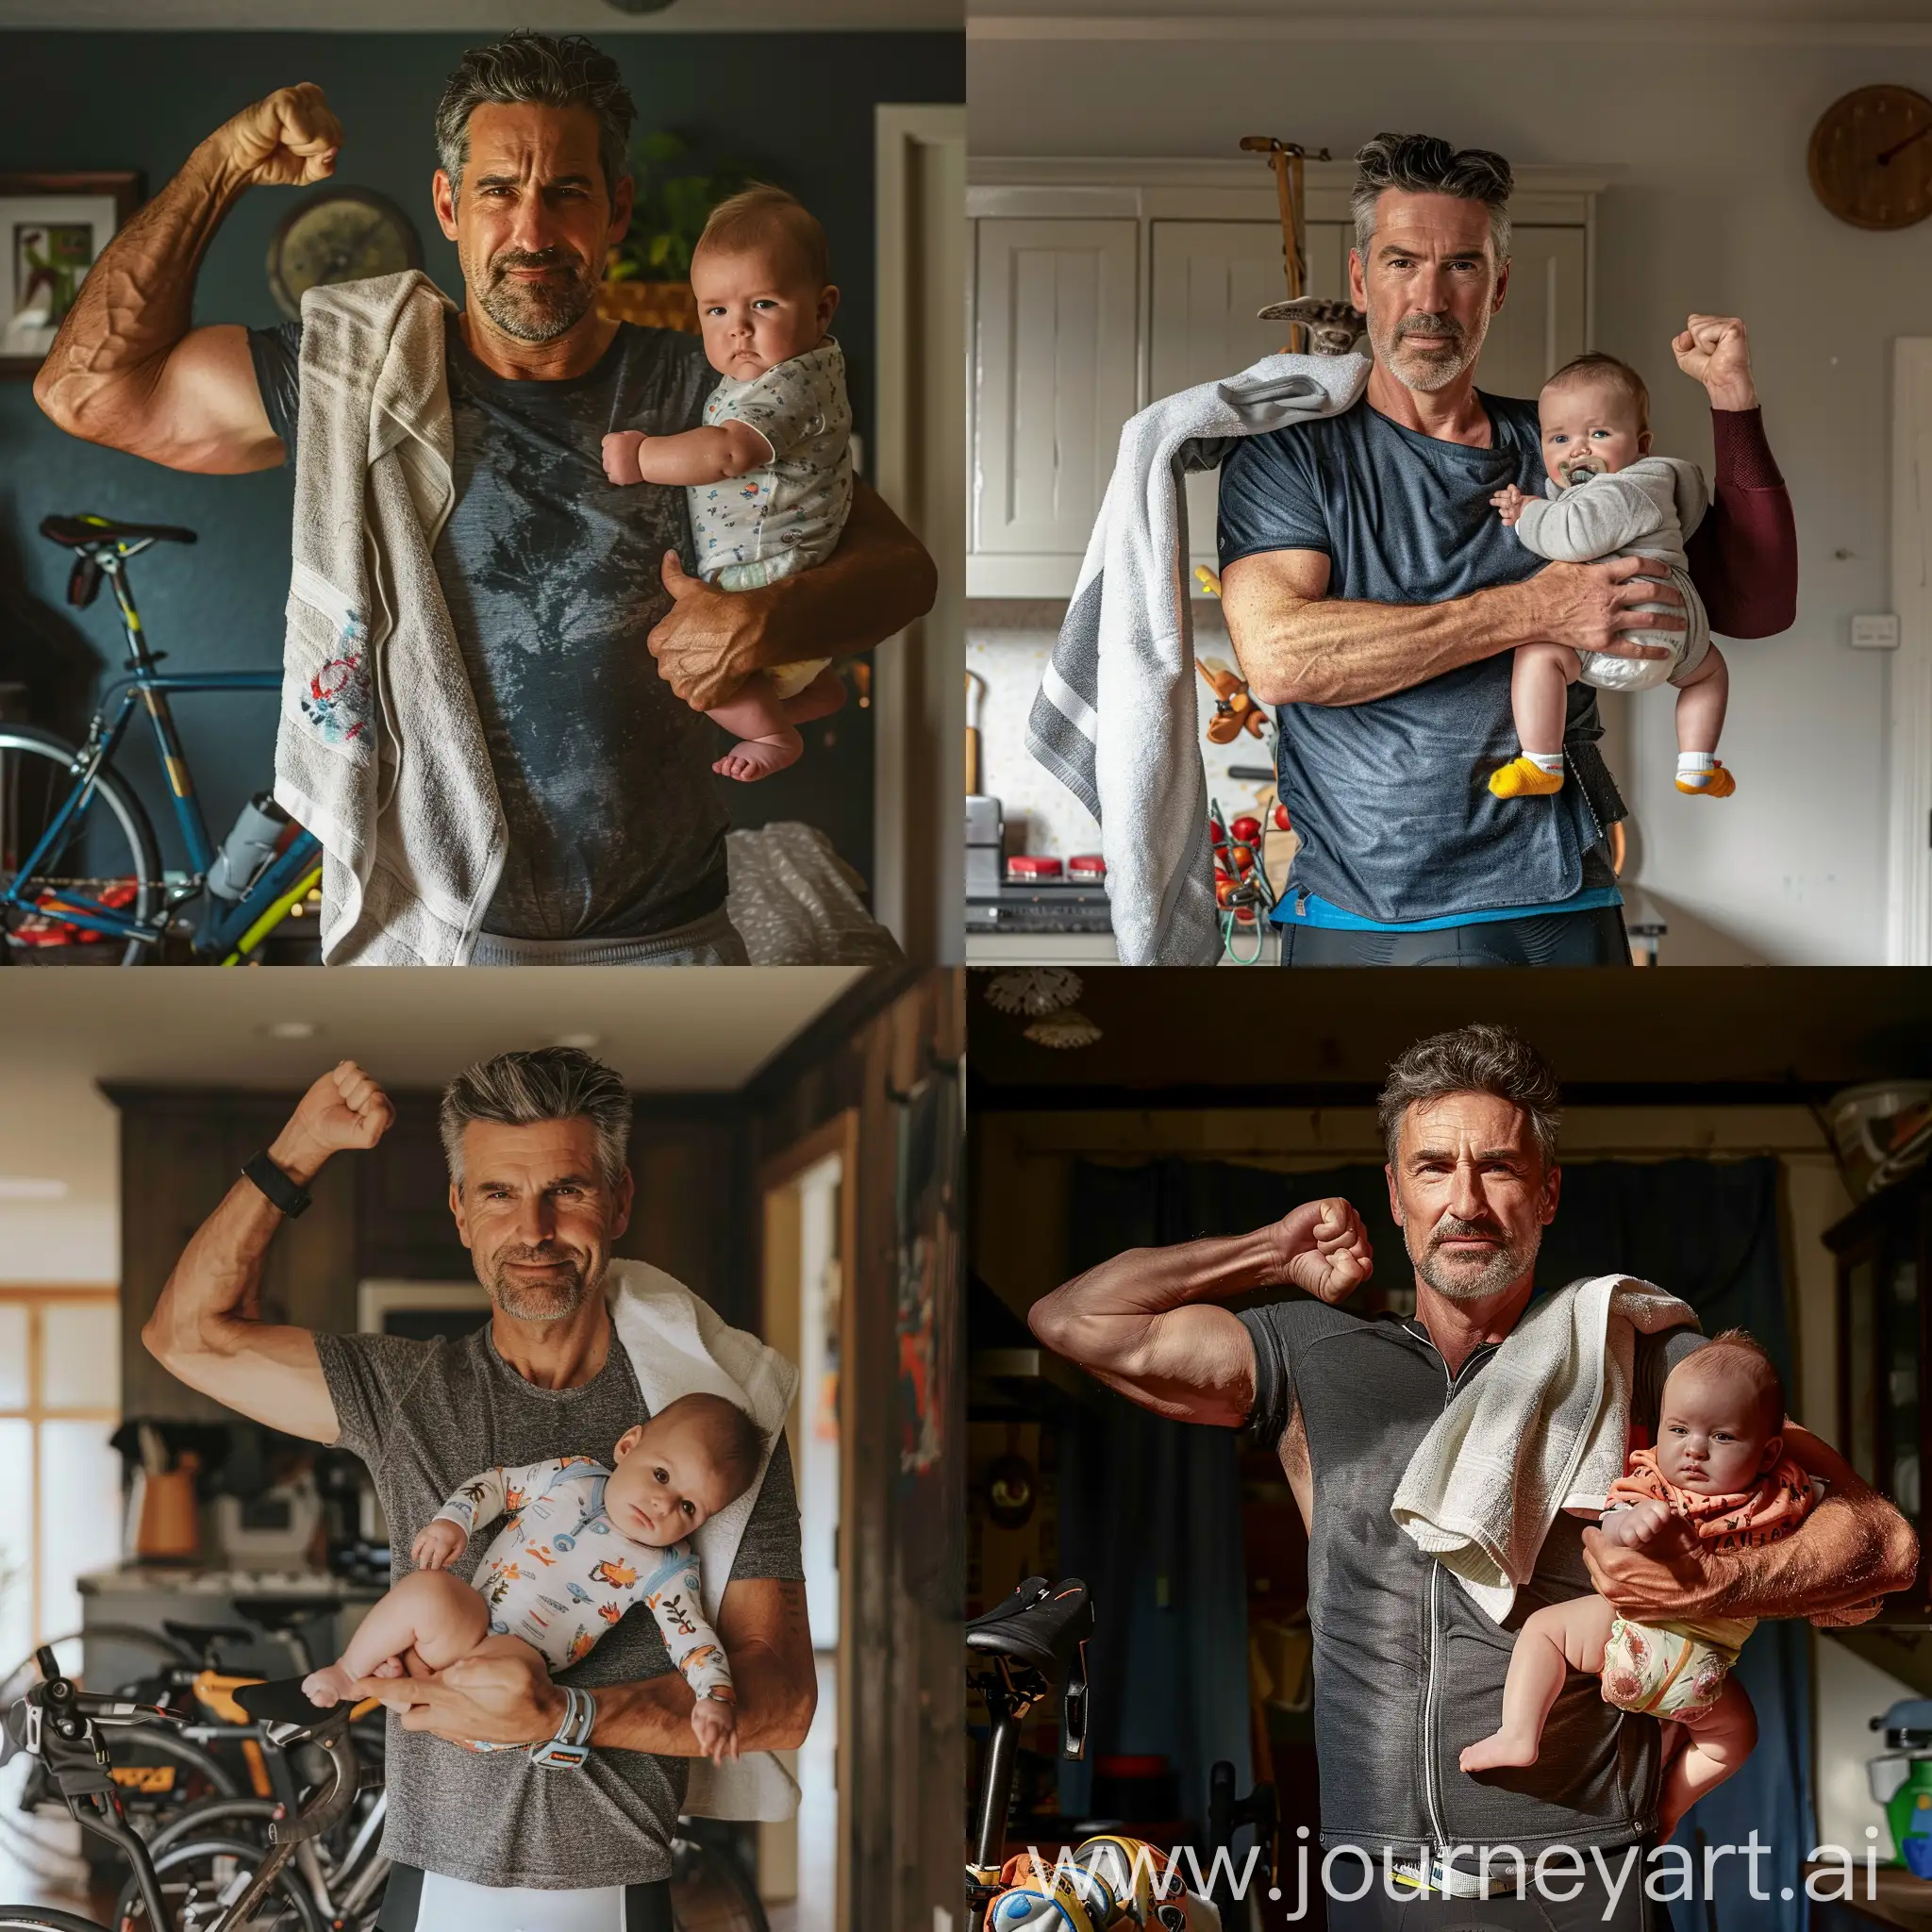 A middle aged father with a kitchen towel on his shoulder. He also has one pant leg rolled up because he just got home from cycling. He is flexing one arm holding a baby with it